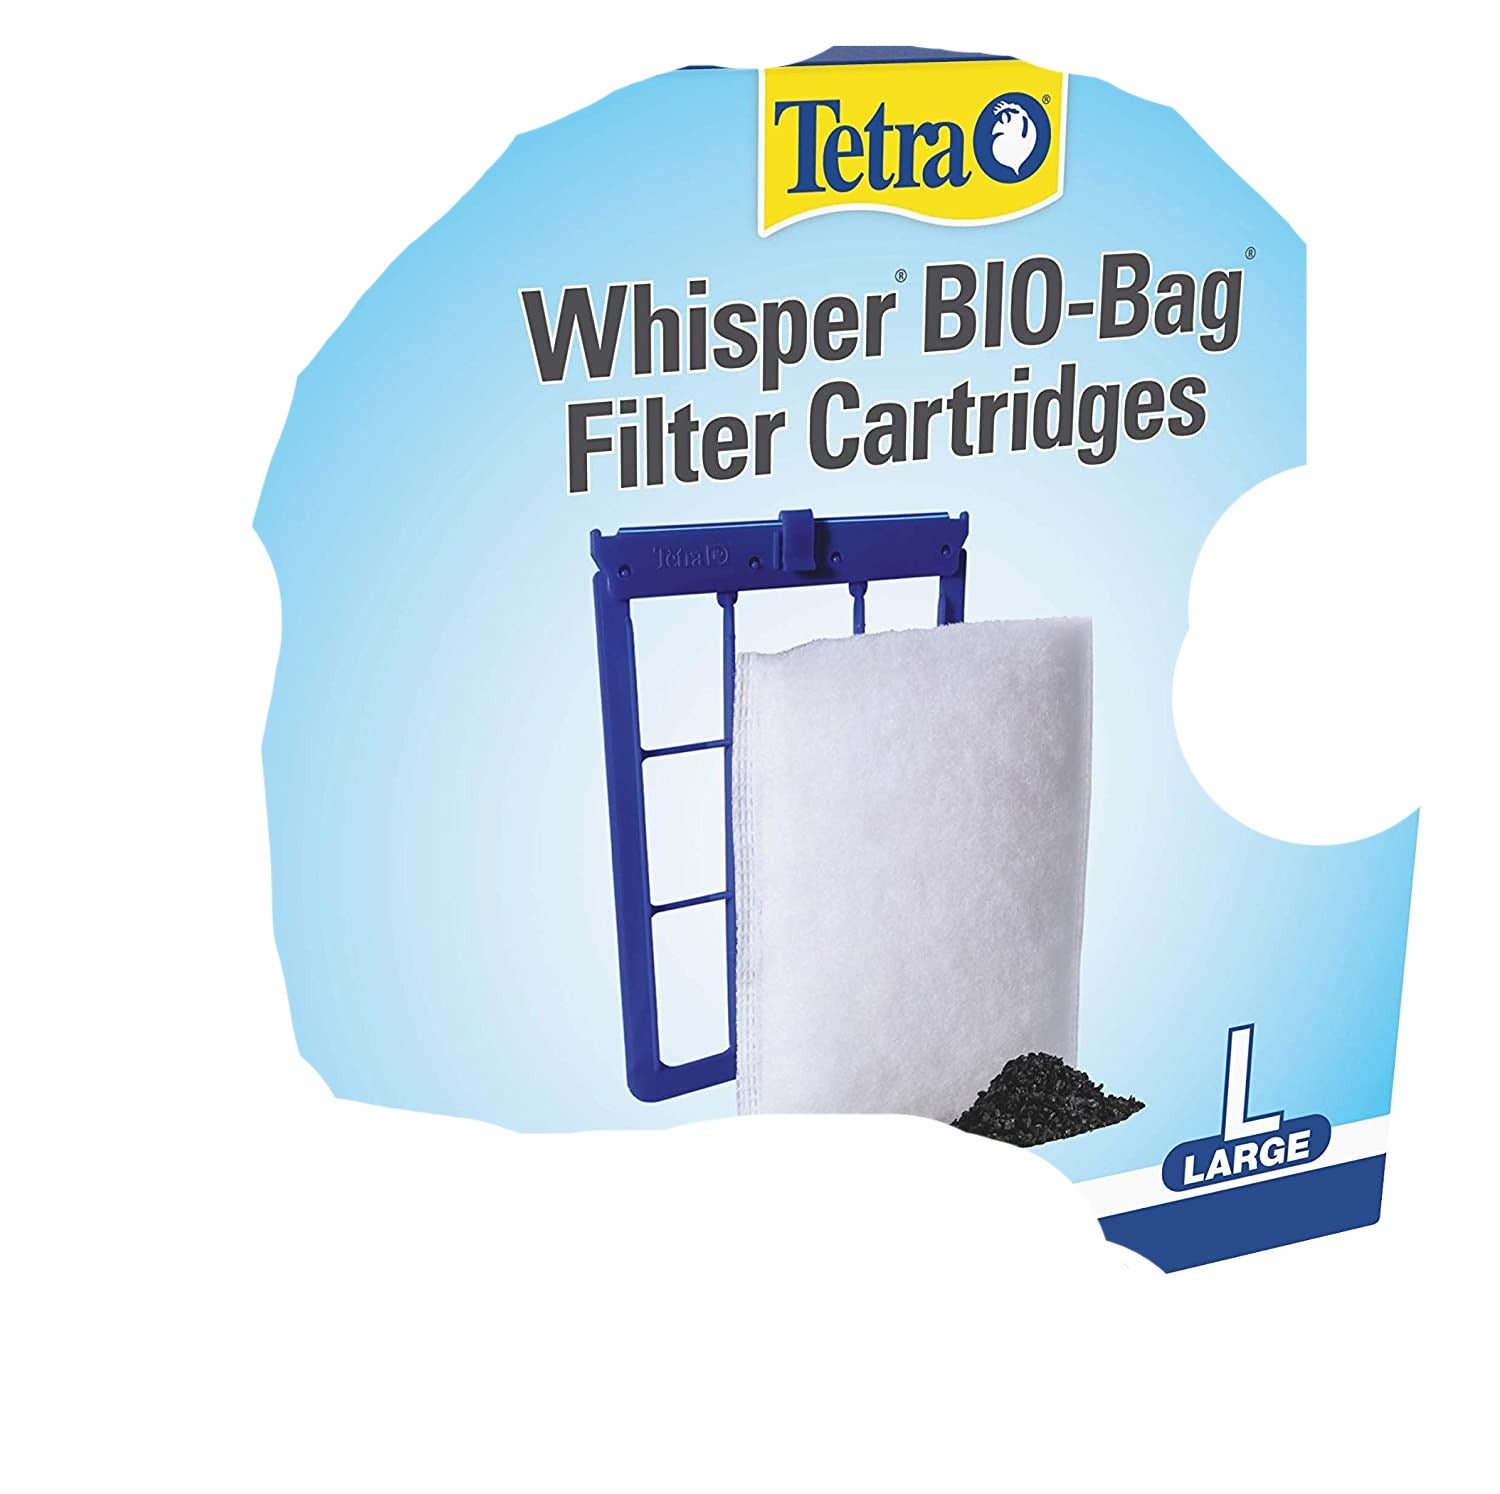 FREE - 3 pack- Tetra Filter Cartridges replacement. (Large size)